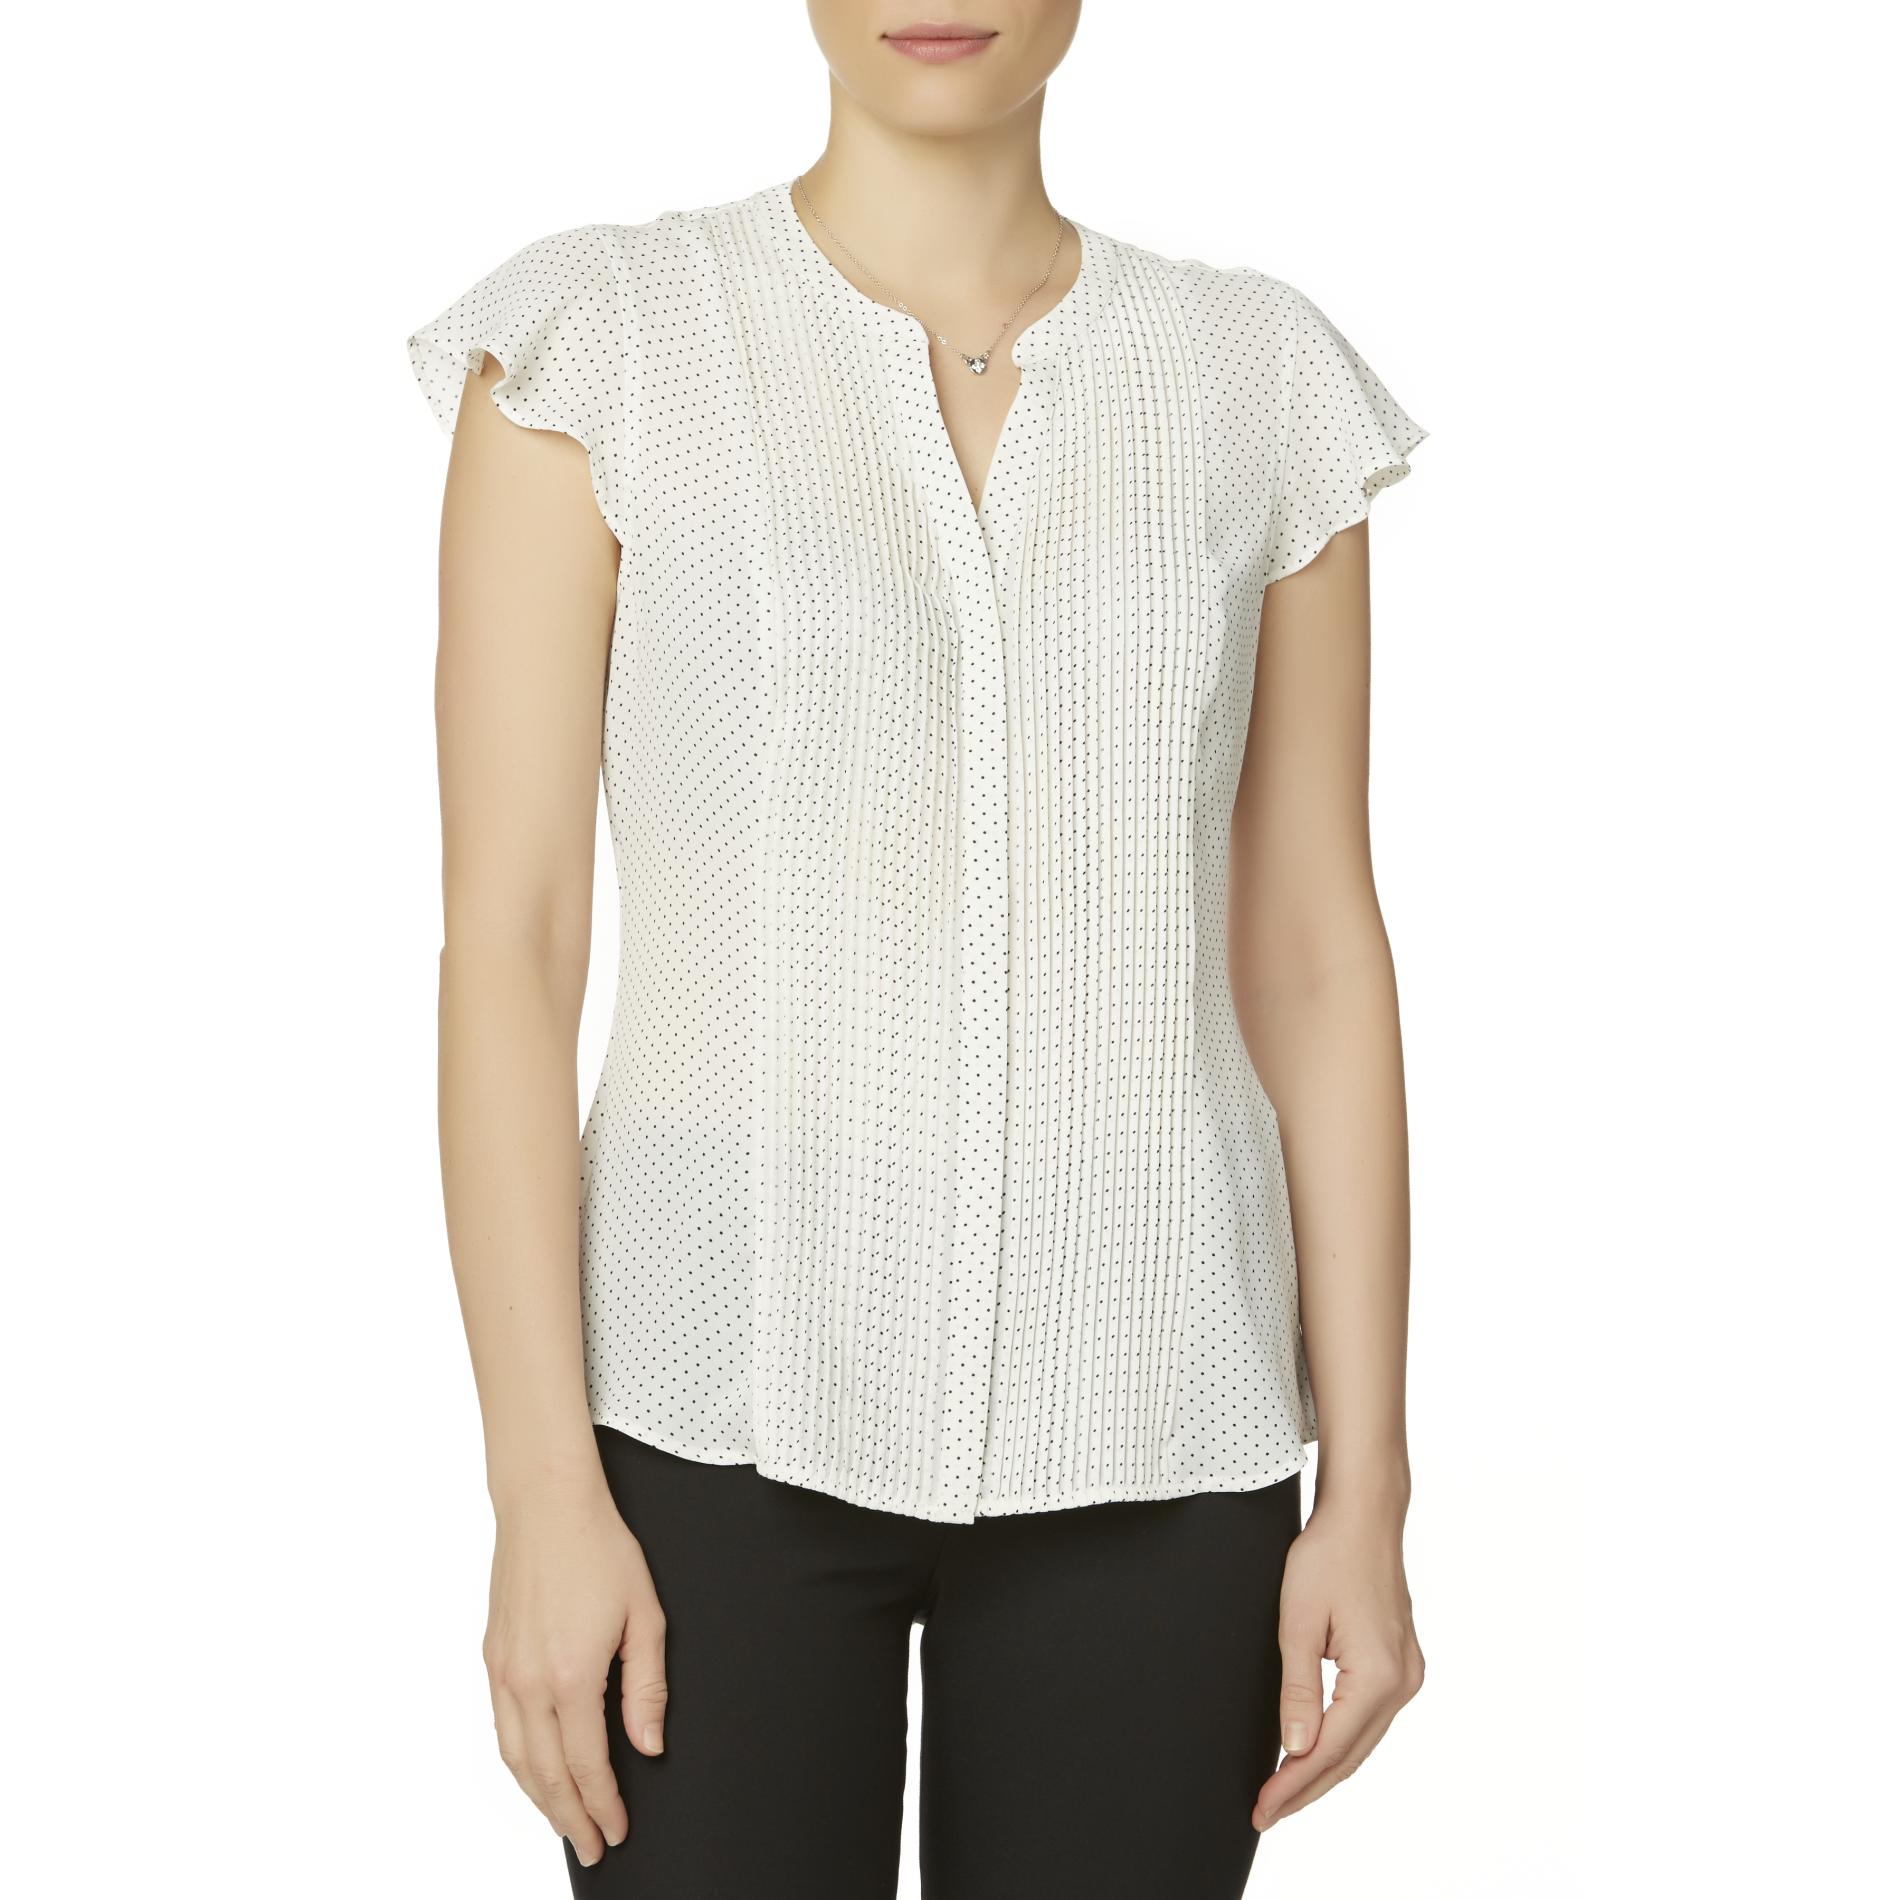 Simply Styled Women's Pleated Button-Front Blouse - Polka Dot